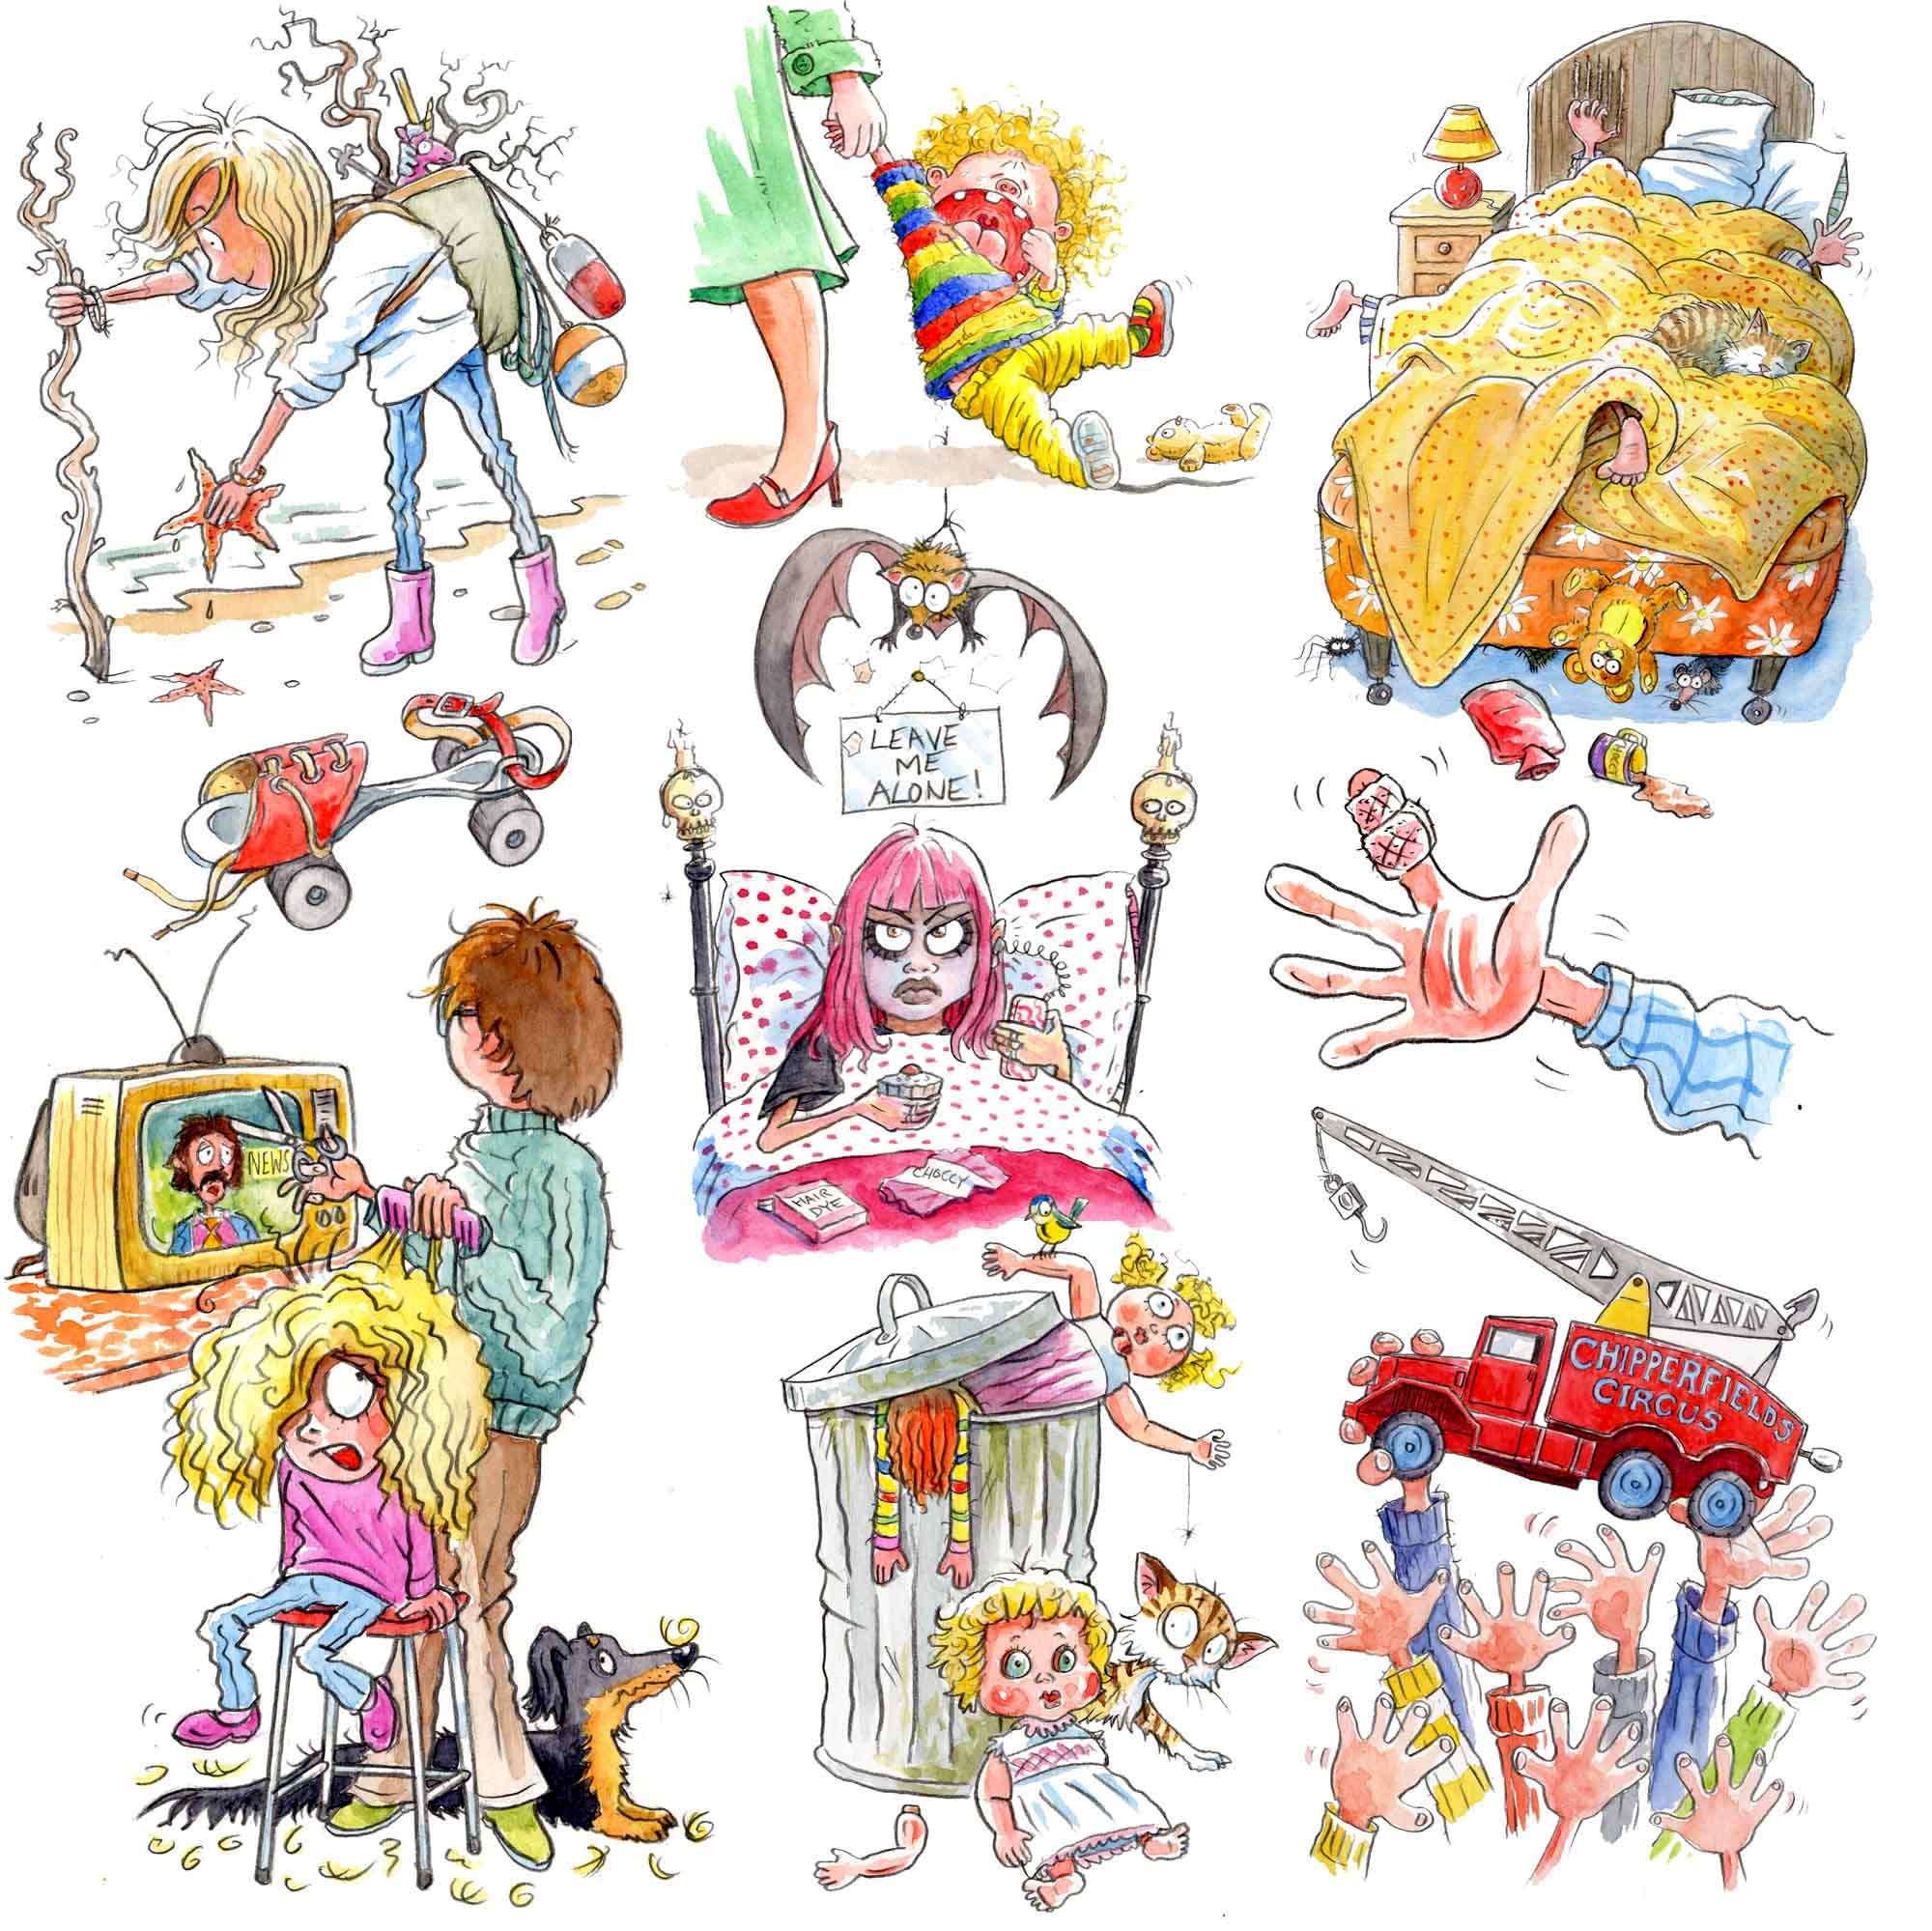 children's book illustrations: beach combing, at the dentist, trapped under the bedclothes, haircut, grumpy goth kid, toys in dustbin, toy lorry, 
roller skate, sausage dog